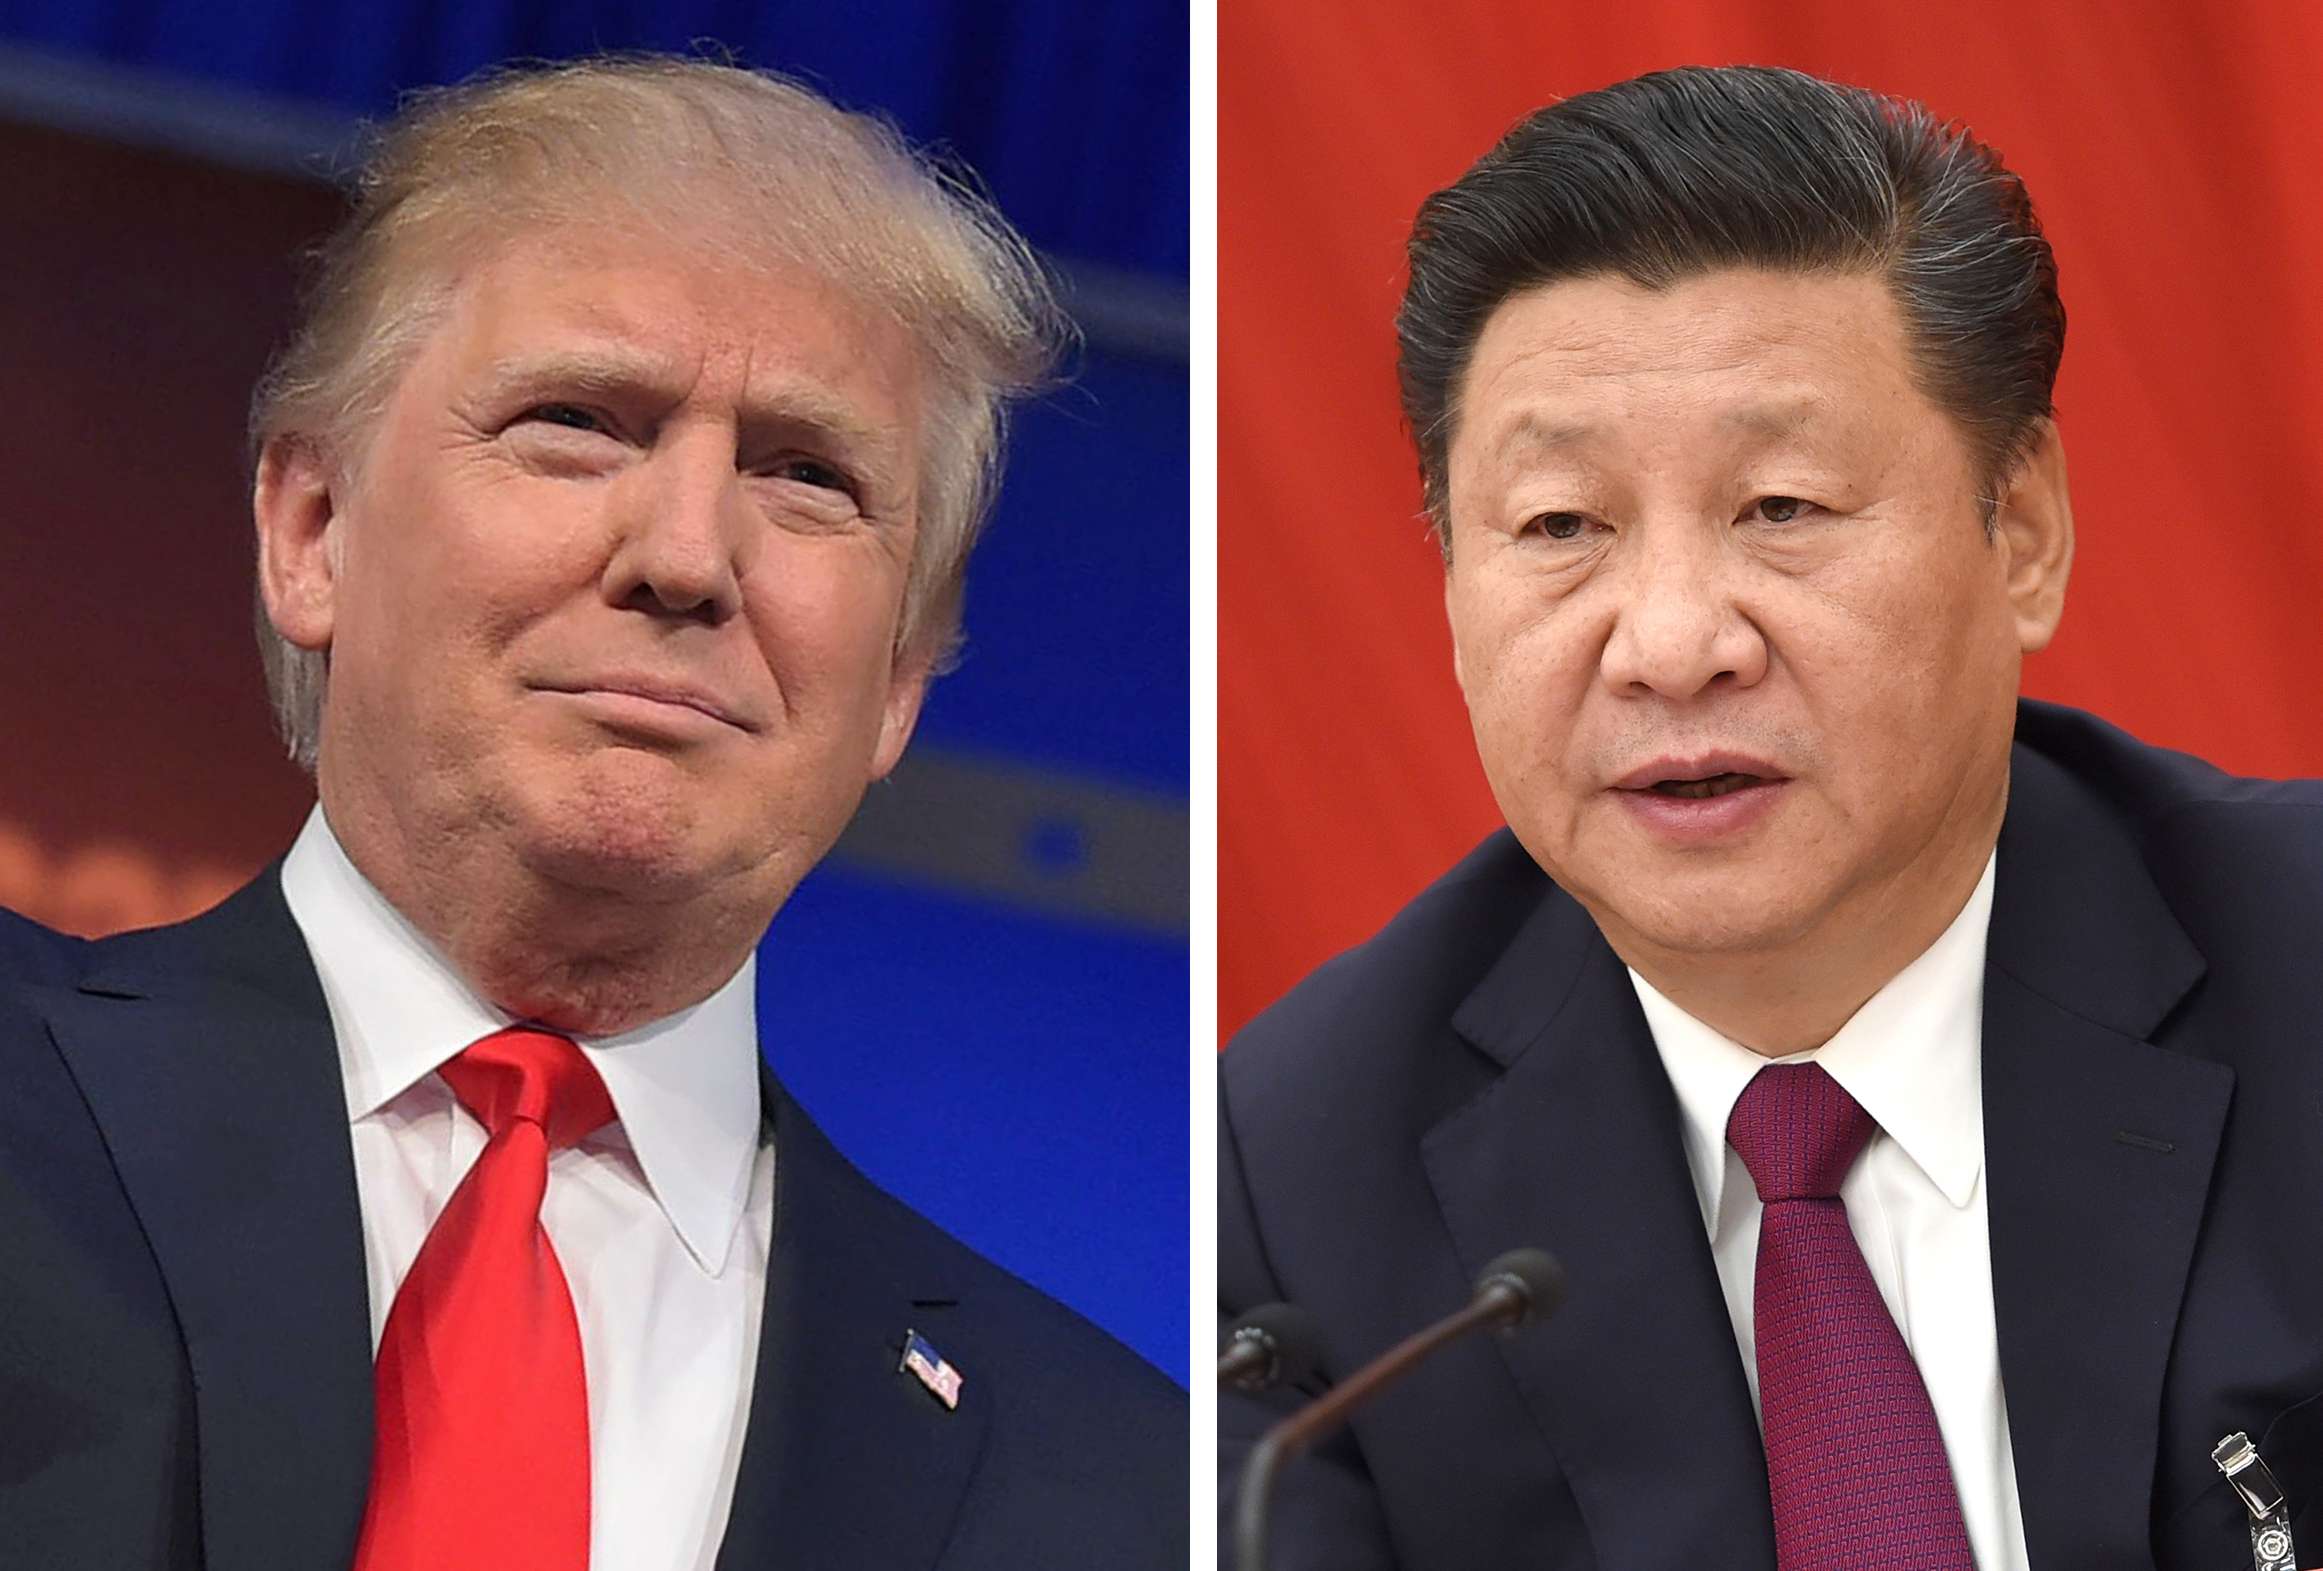 Chinese leader Xi Jinping looks forward to working with Trump, who promises that Washington will get along with other nations